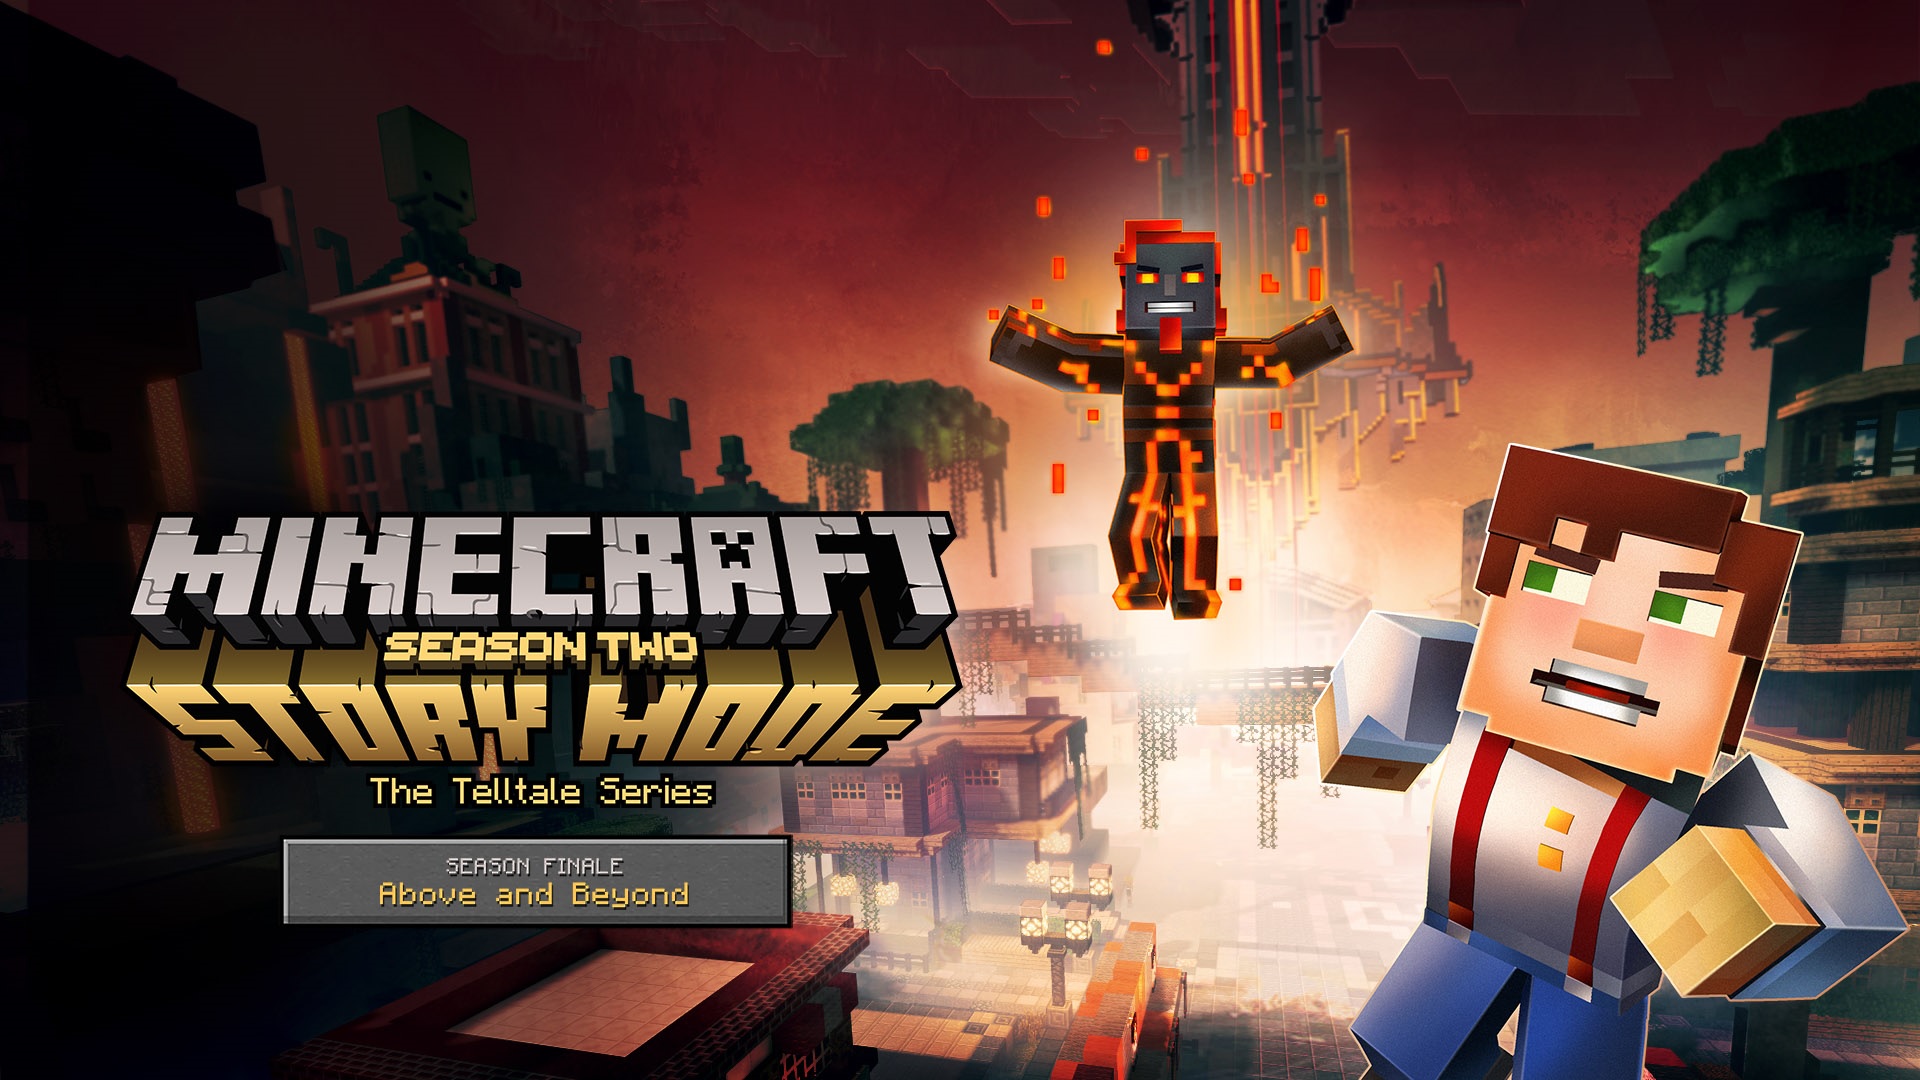 Minecraft: Story Mode turns up on Wii U this week